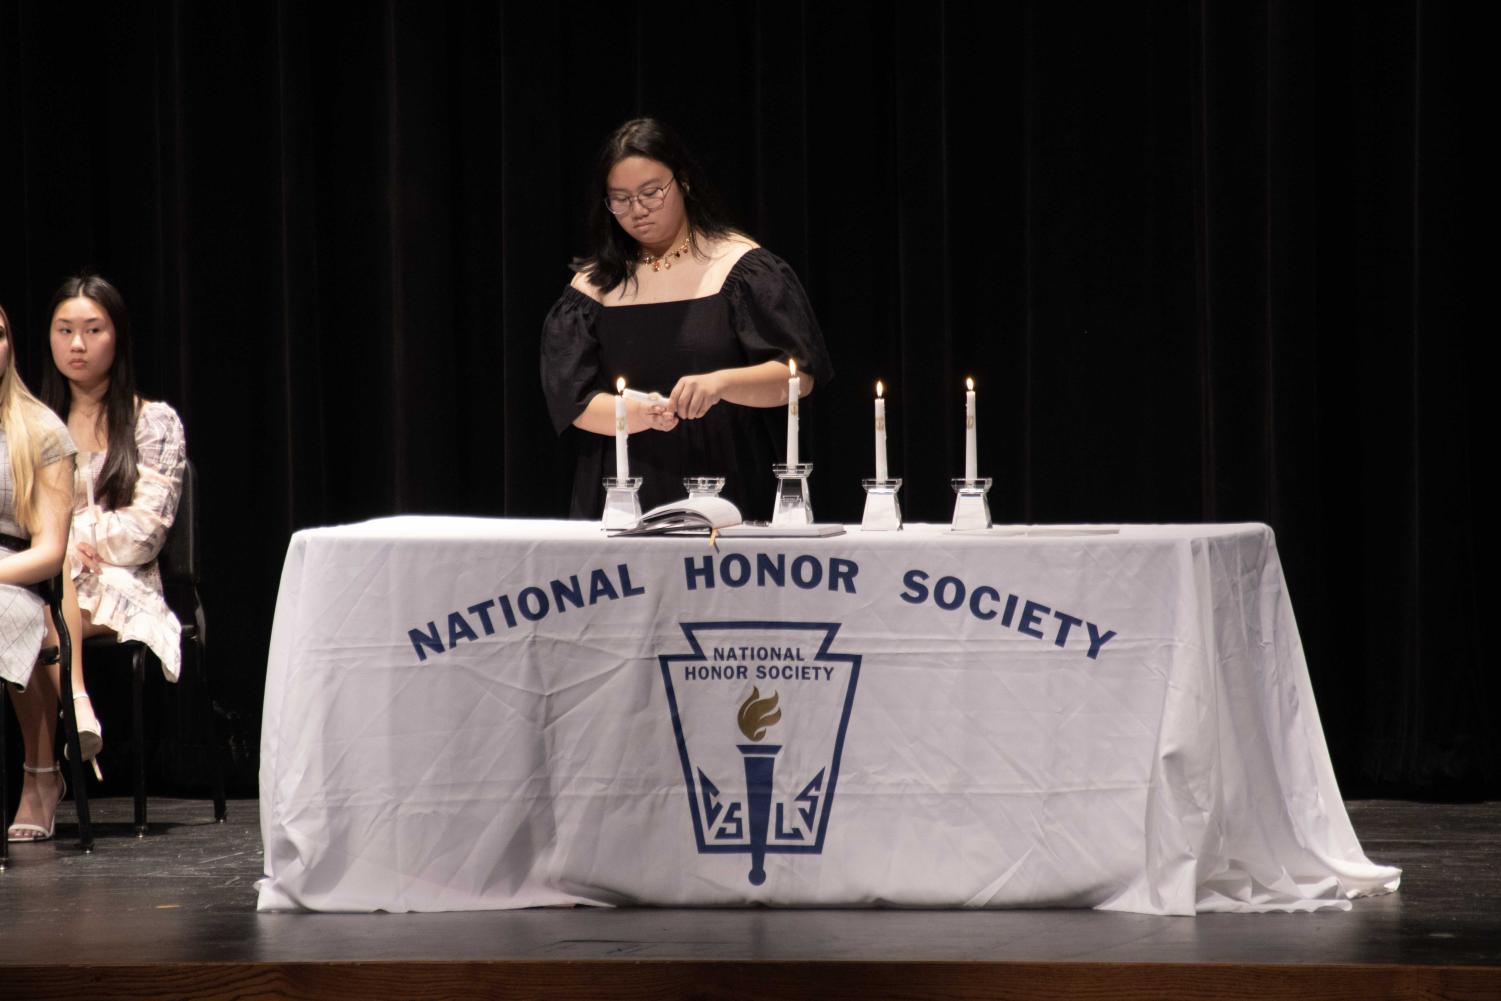 NHS+honors+22-23+inductees+at+ceremony%2C+breaks+record